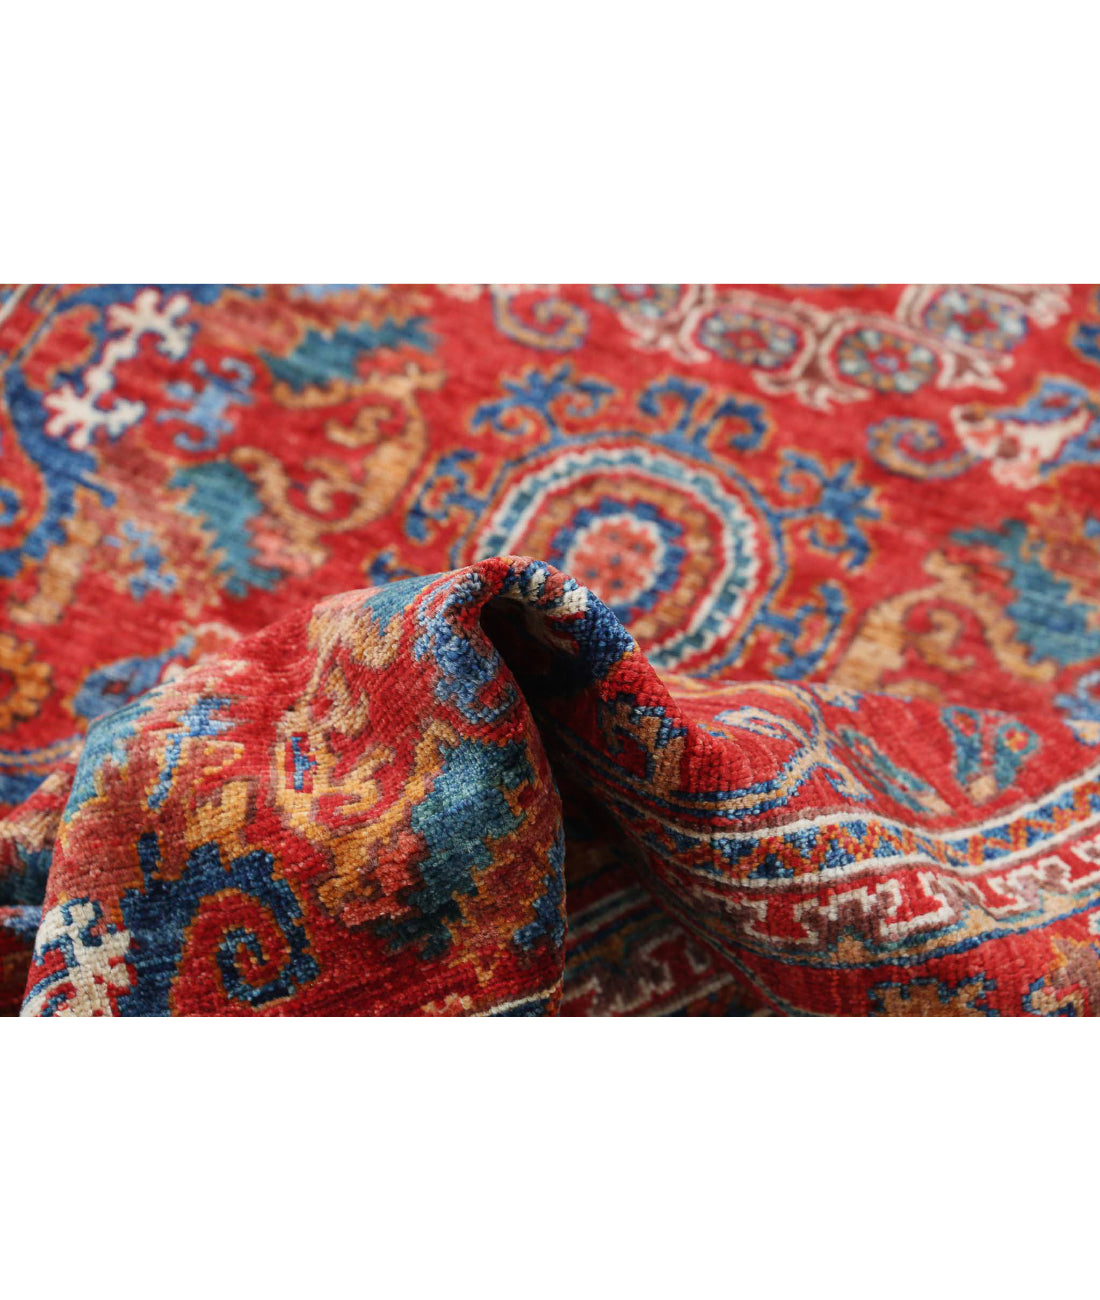 Hand Knotted Nomadic Caucasian Humna Wool Rug - 4'0'' x 6'1'' 4'0'' x 6'1'' (120 X 183) / Red / N/A